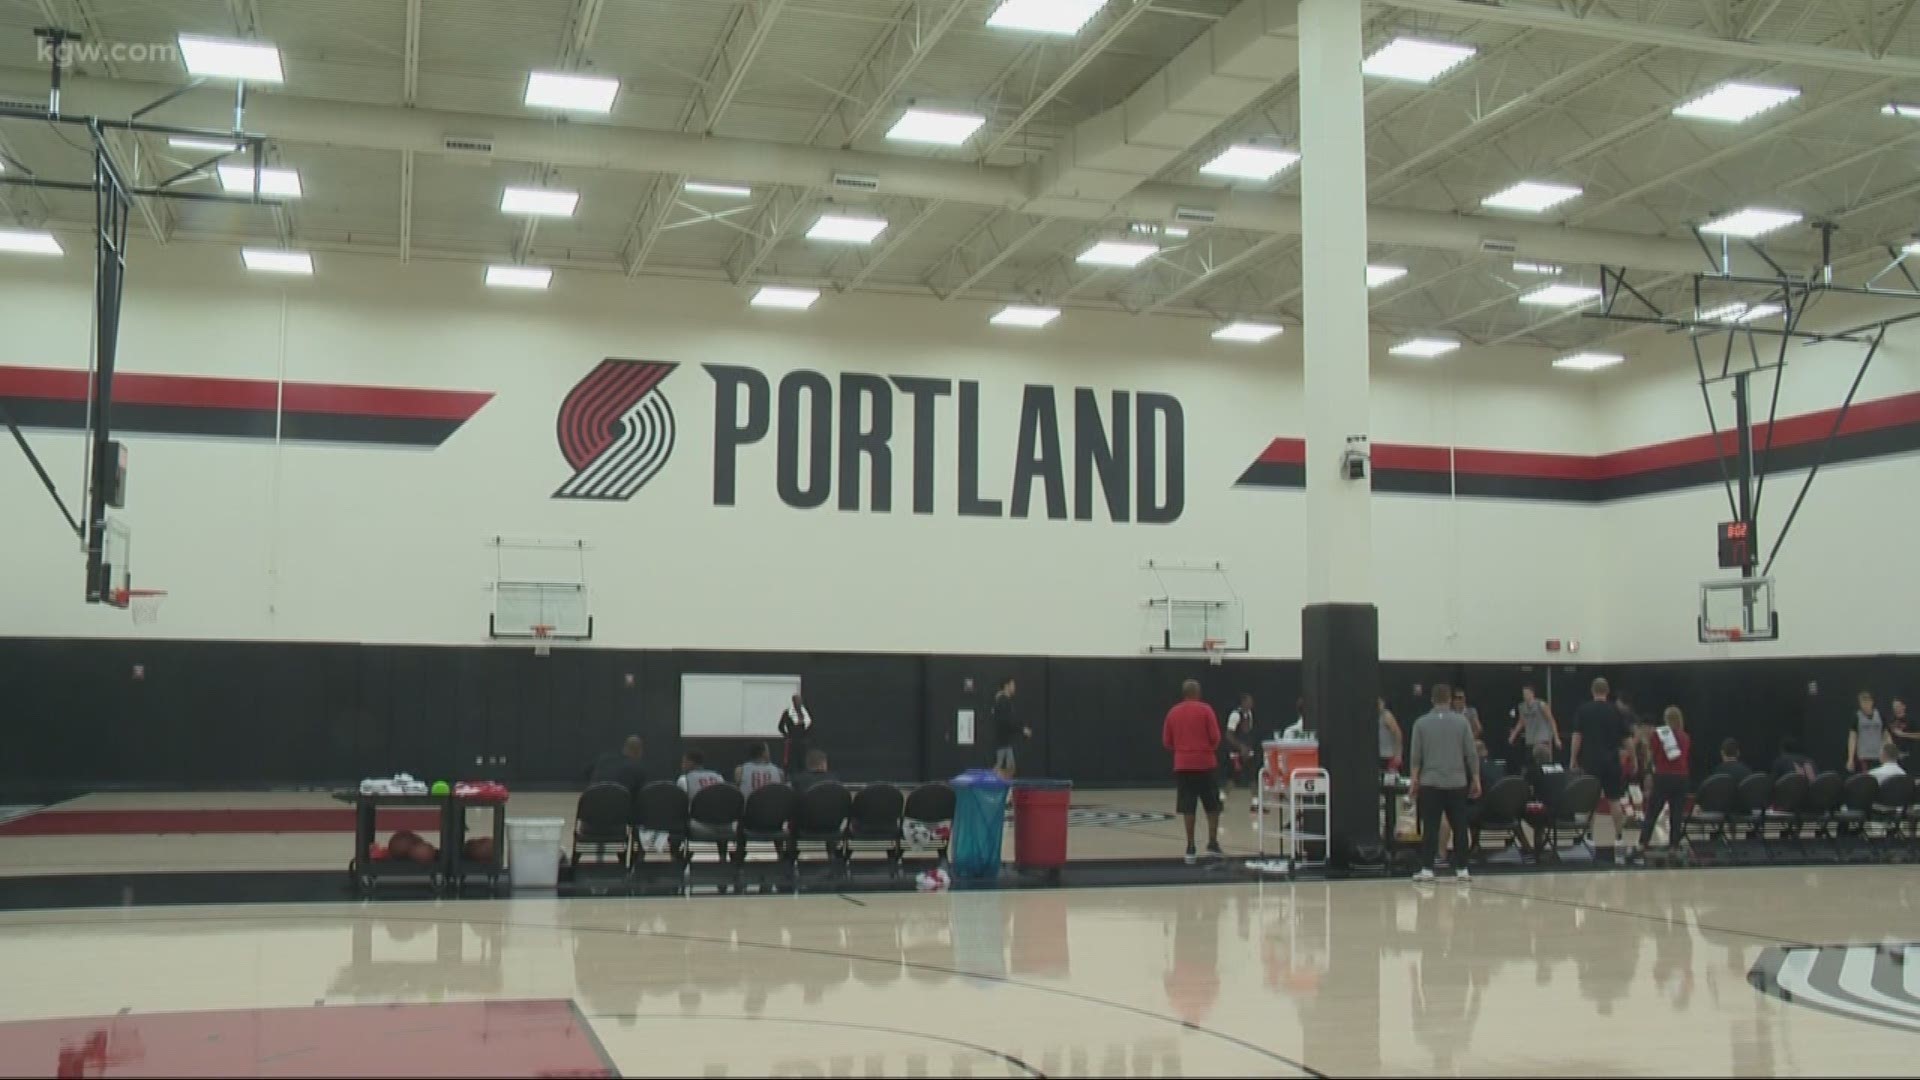 The Blazers are getting ready for summer league